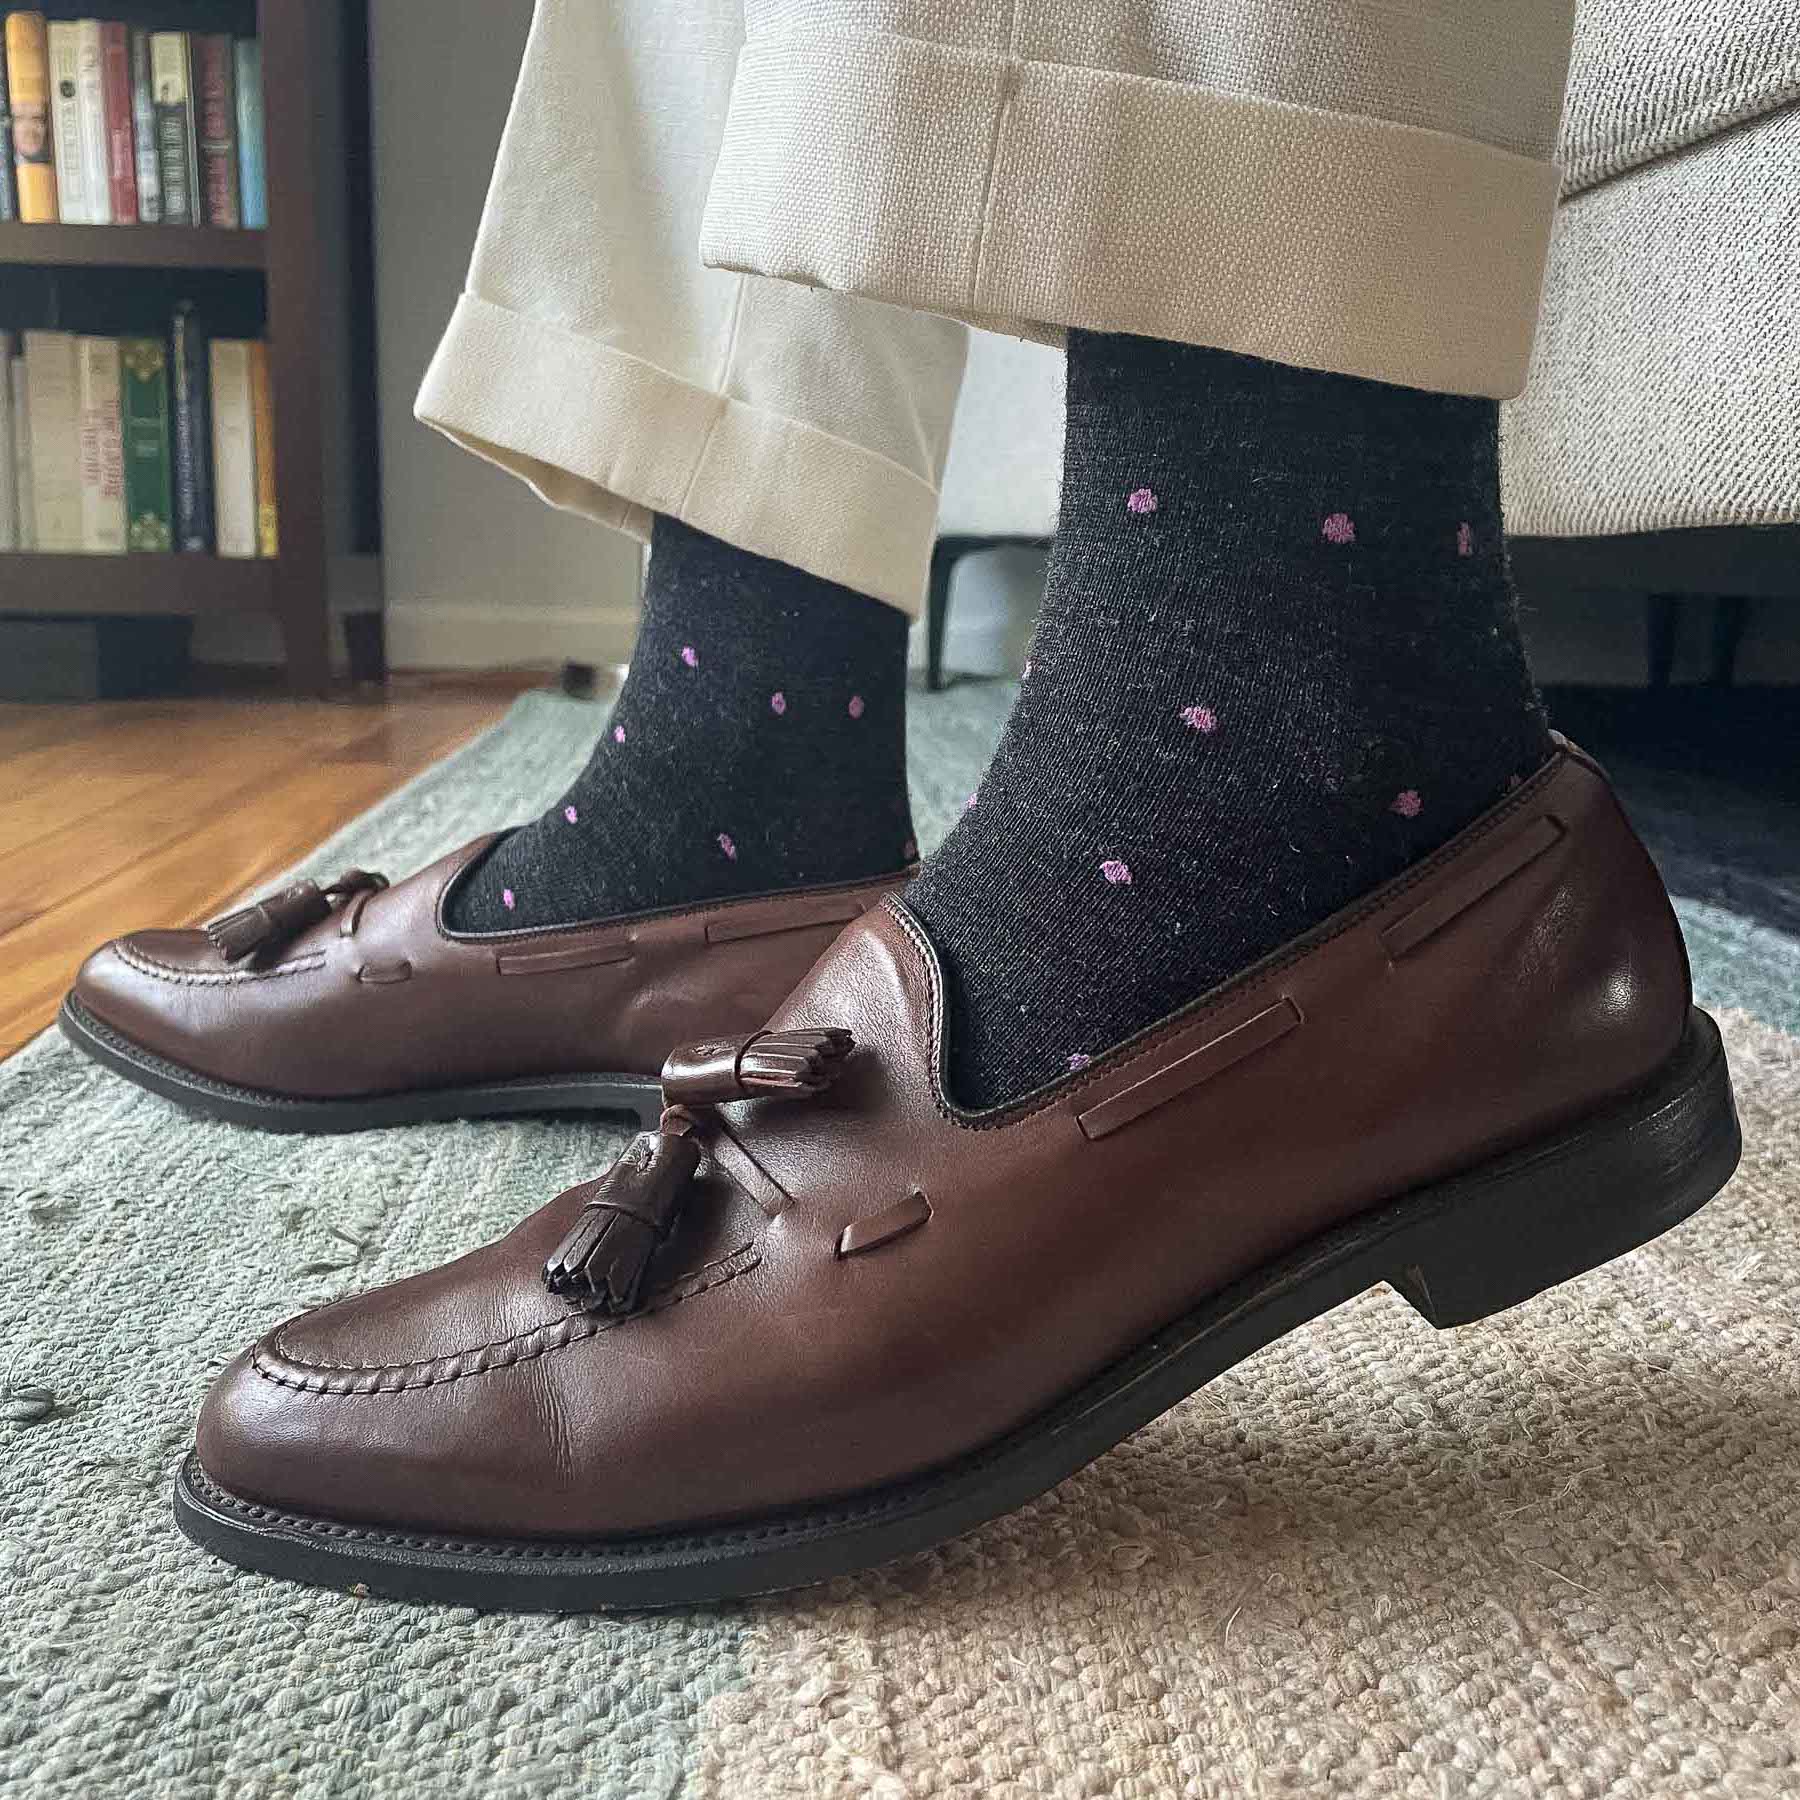 Do You Wear Socks With Loafers? Your Guide to Wearing Loafers With Socks –  Del Toro Shoes